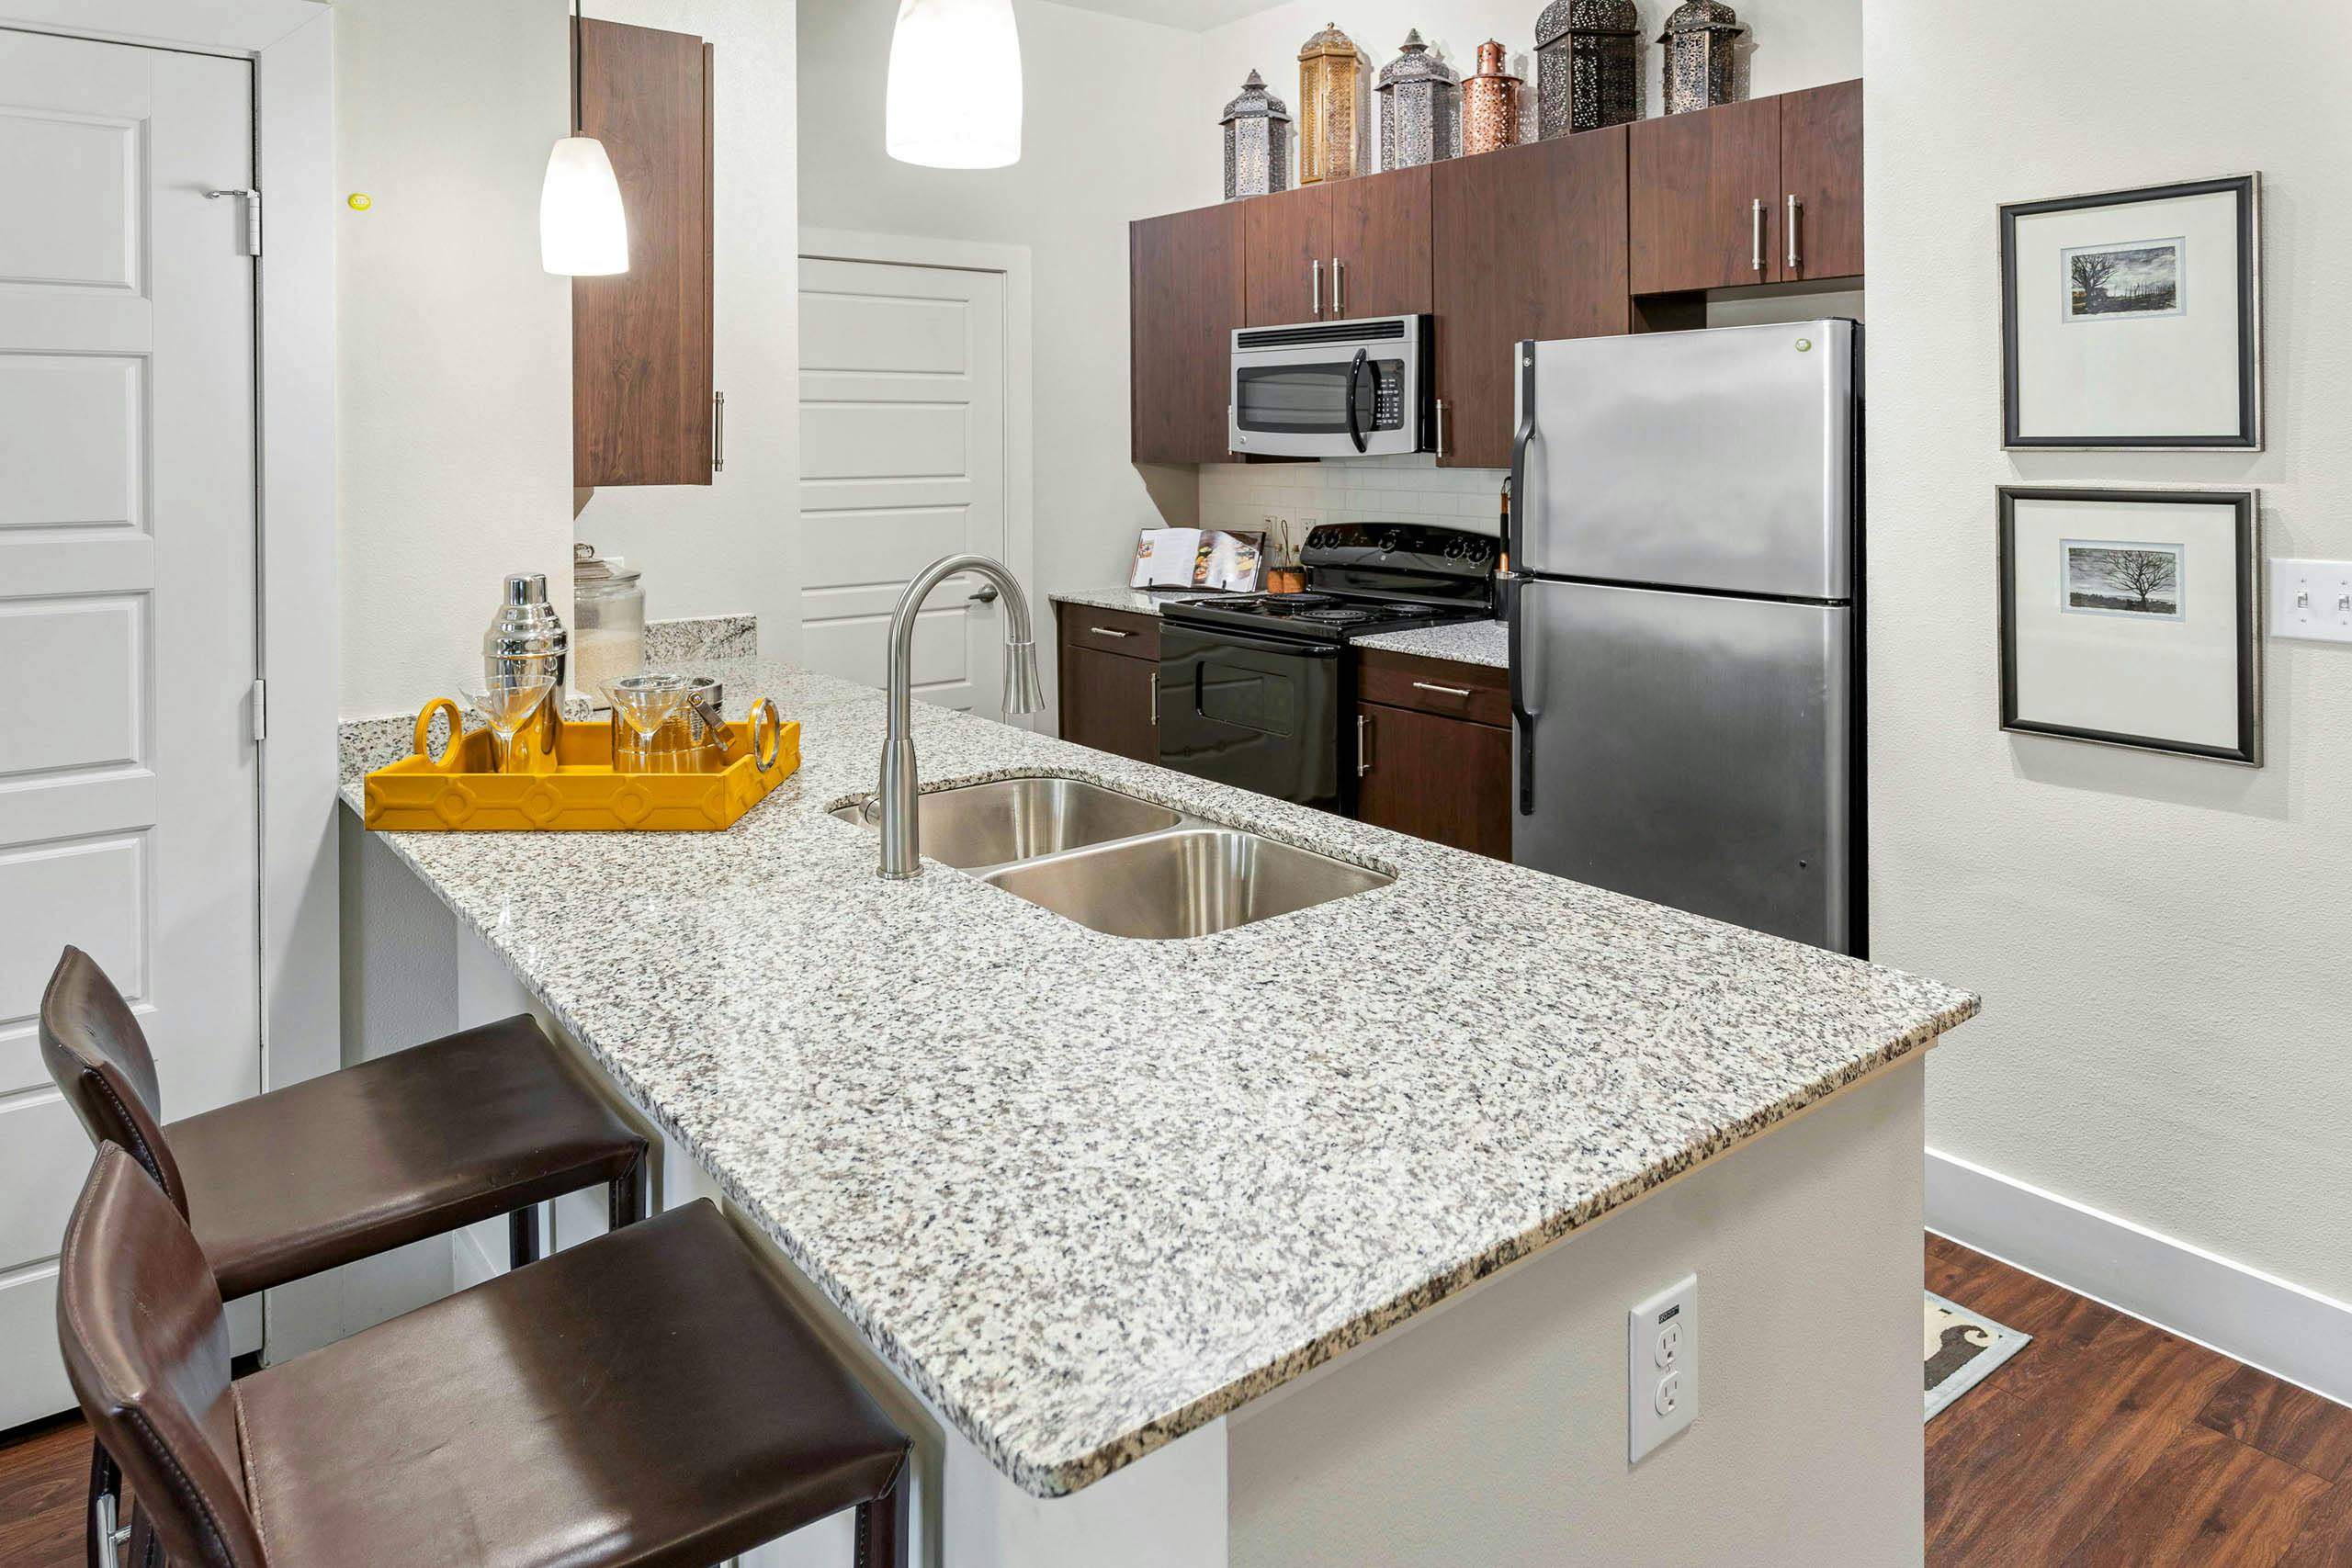 AMLI at Escena apartment kitchen with wooden cabinets and a yellow tray with drinking glasses on granite countertop 